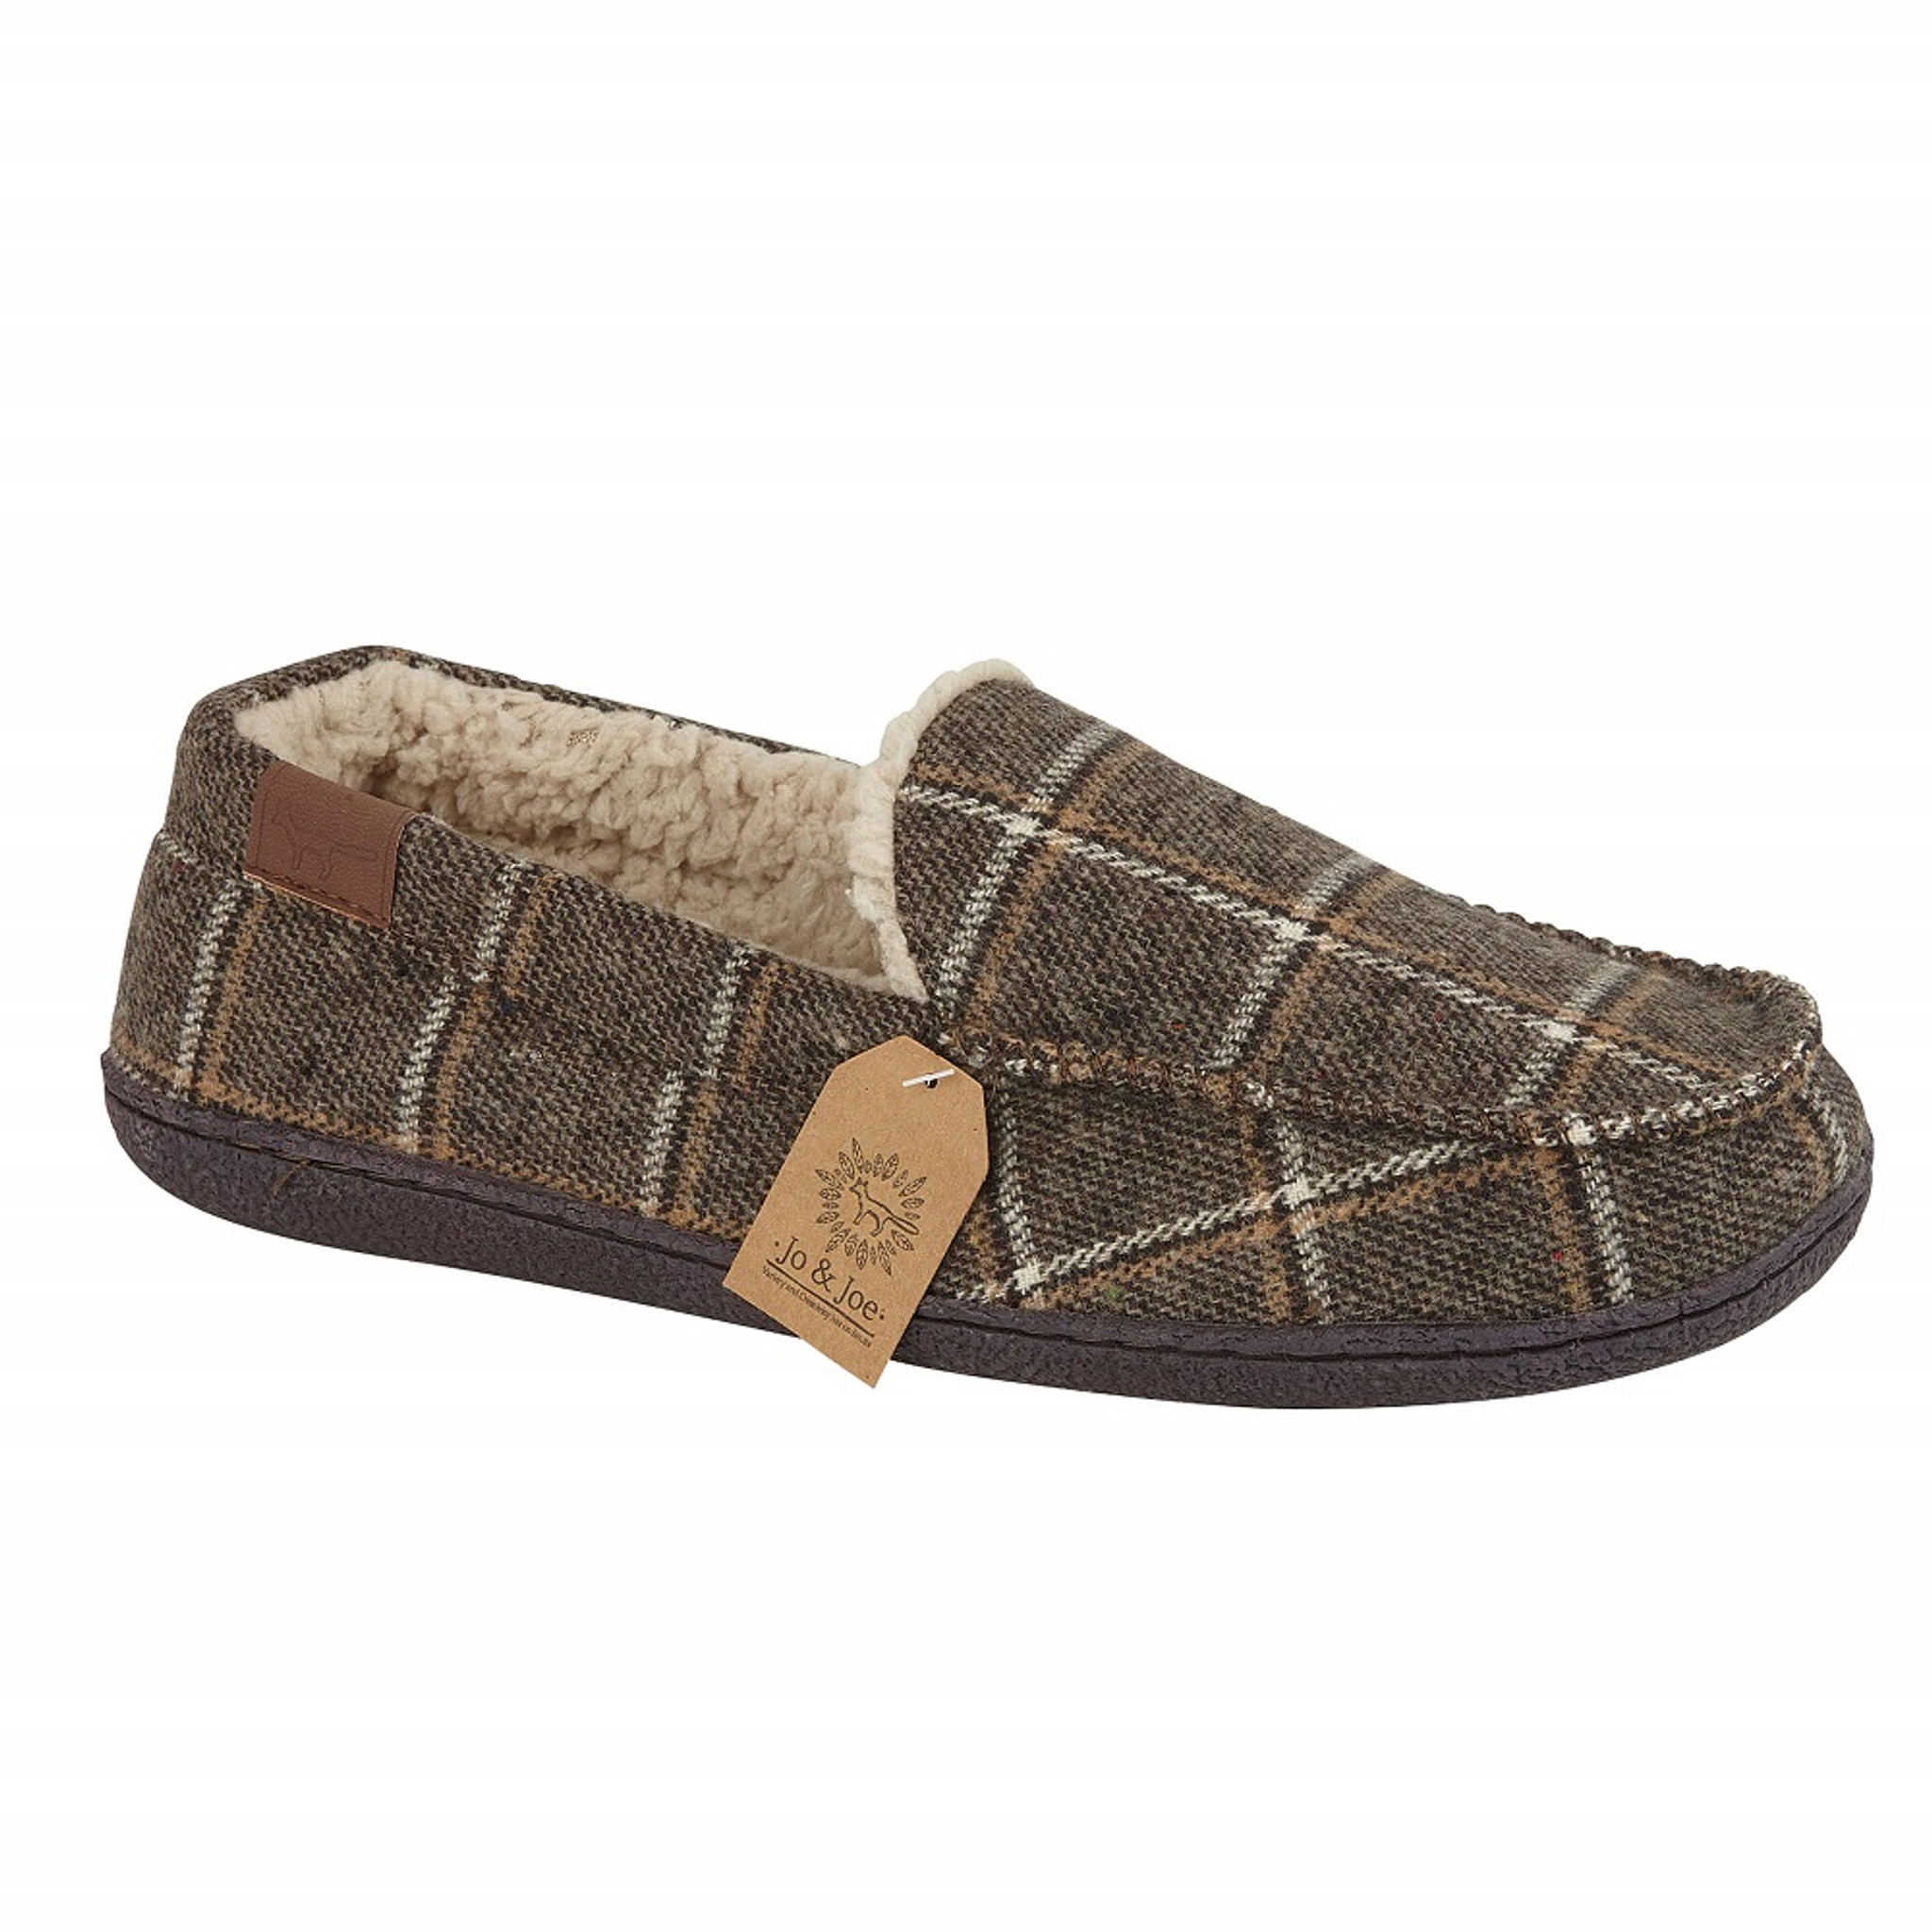 mens sherpa lined slippers